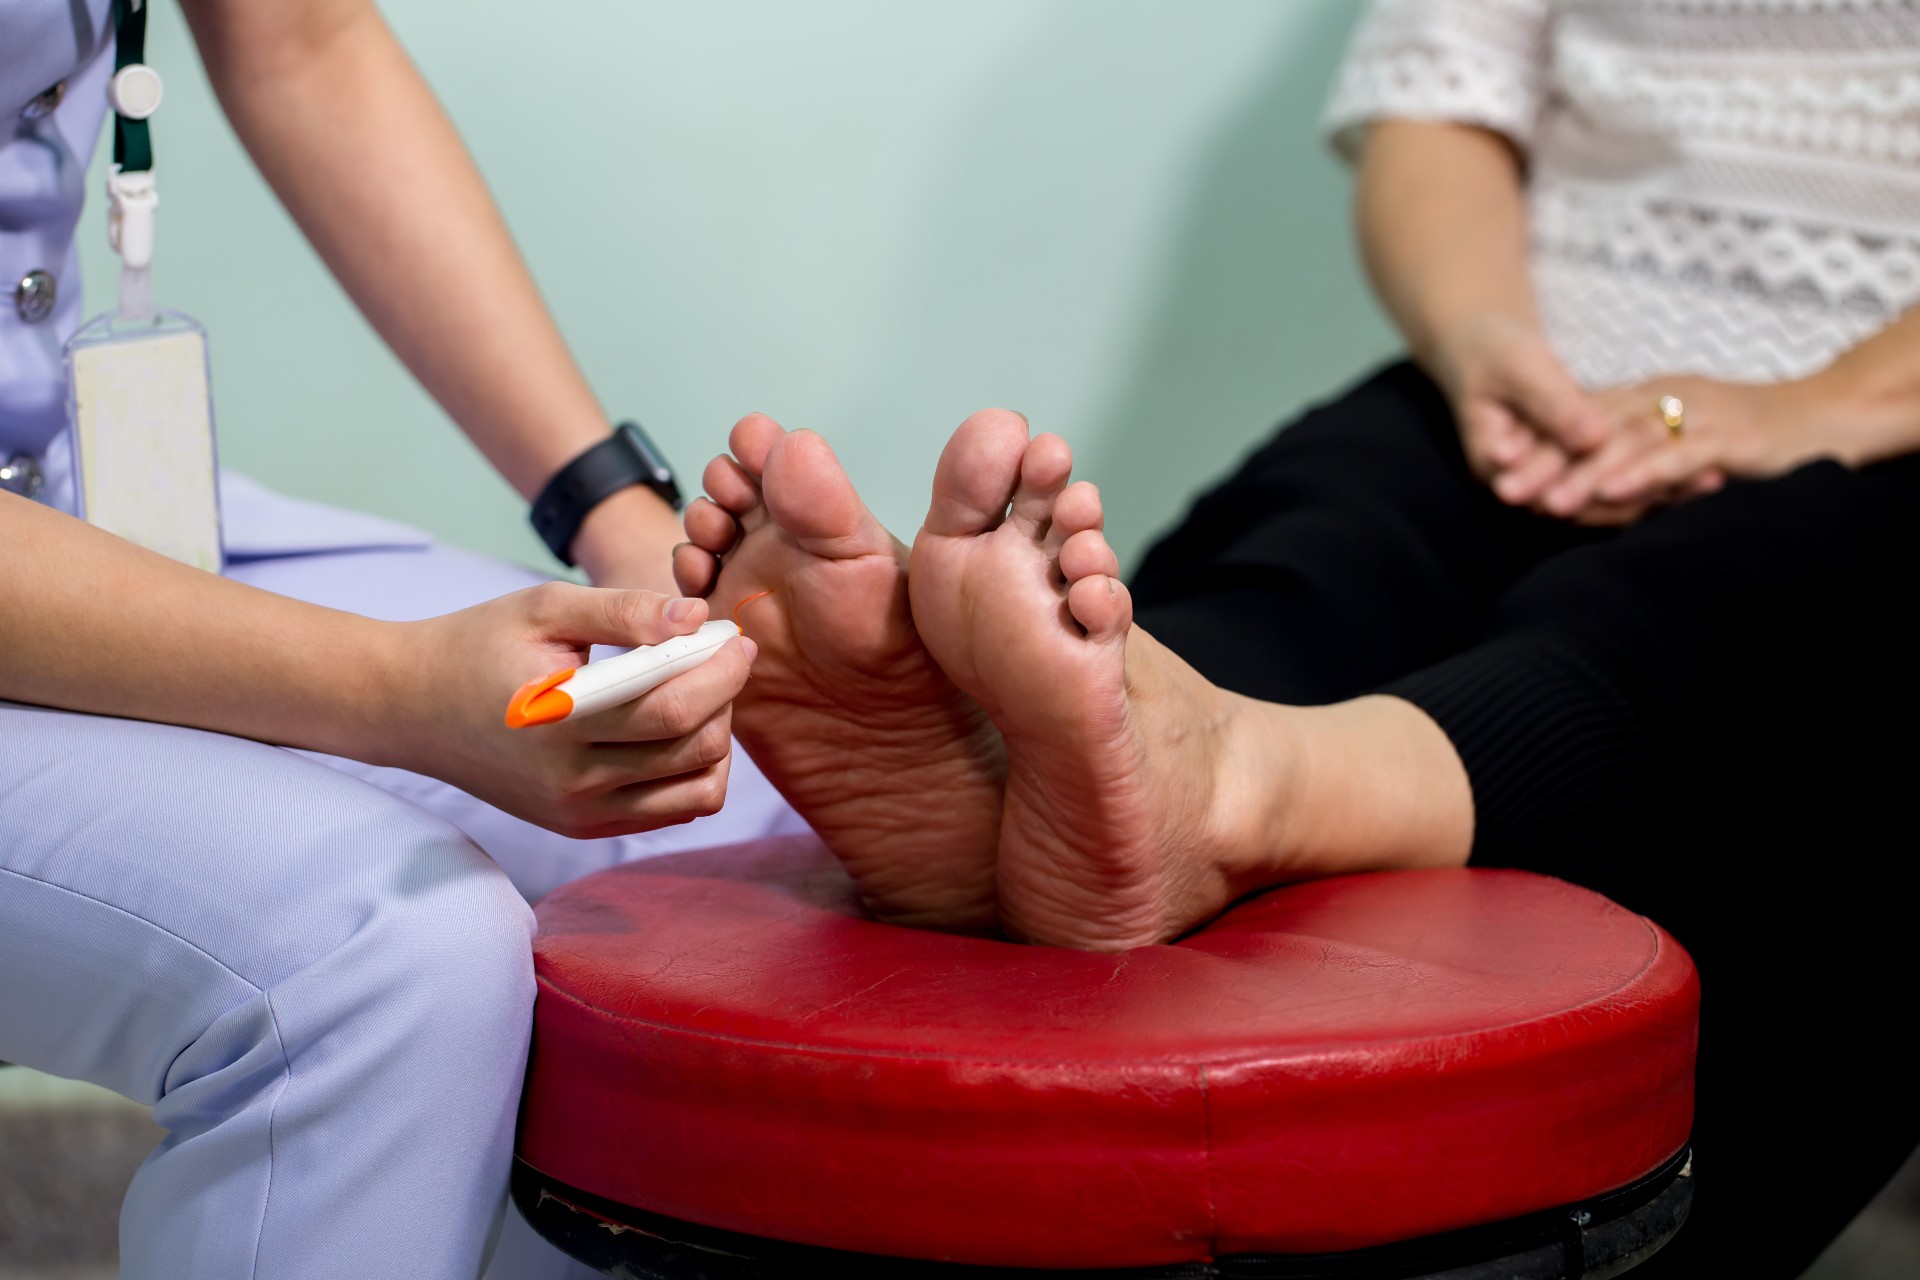 a doctor checking a diabetic patient's feet